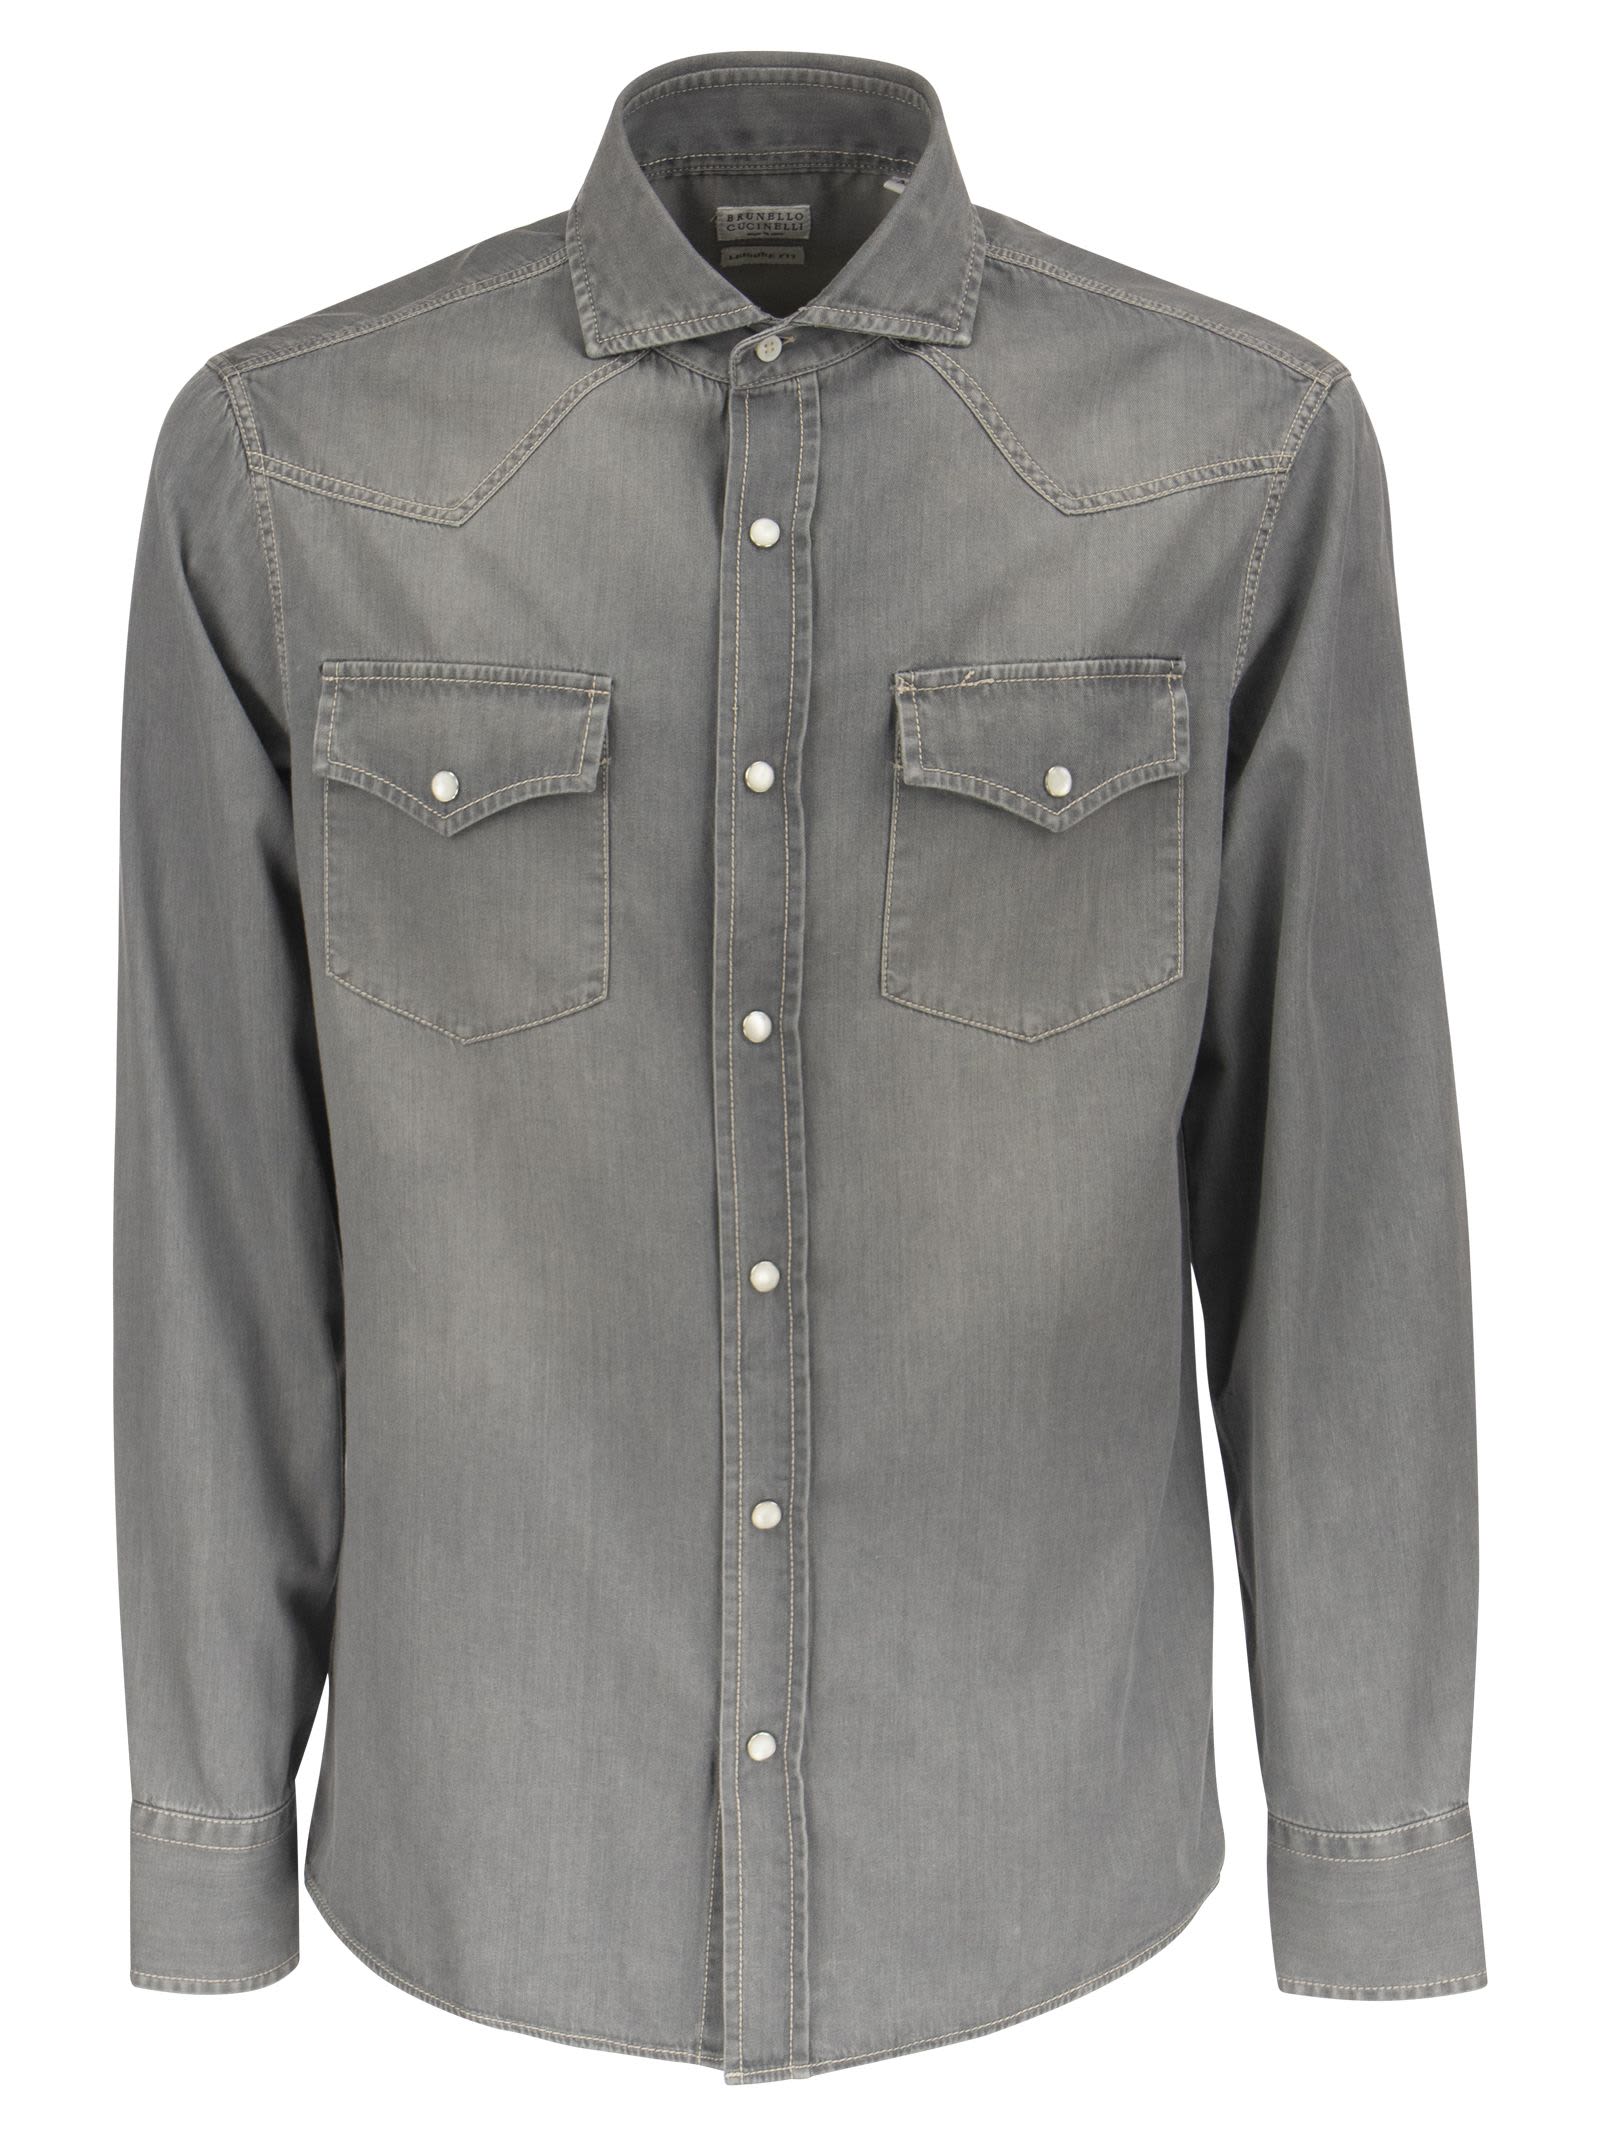 Brunello Cucinelli Grey Denim Leisure Fit Shirt With Press Studs, Shoulder Pad And Pockets